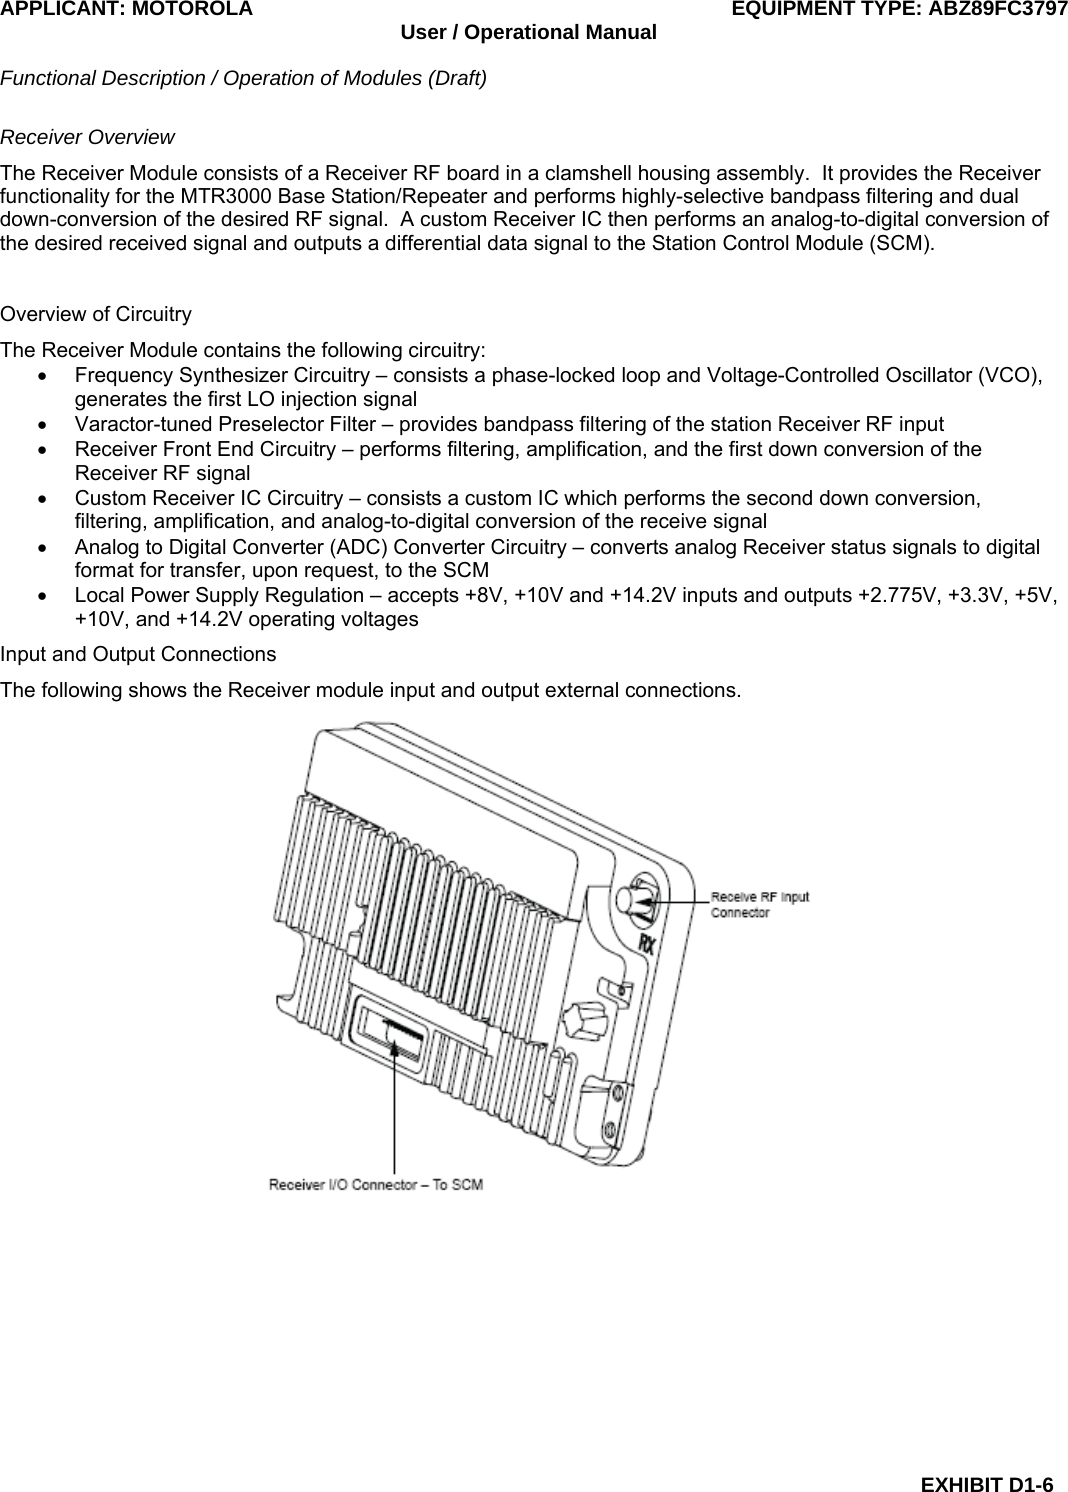 APPLICANT: MOTOROLA  EQUIPMENT TYPE: ABZ89FC3797 User / Operational Manual  Functional Description / Operation of Modules (Draft)  EXHIBIT D1-6 Receiver Overview The Receiver Module consists of a Receiver RF board in a clamshell housing assembly.  It provides the Receiver functionality for the MTR3000 Base Station/Repeater and performs highly-selective bandpass filtering and dual down-conversion of the desired RF signal.  A custom Receiver IC then performs an analog-to-digital conversion of the desired received signal and outputs a differential data signal to the Station Control Module (SCM).  Overview of Circuitry The Receiver Module contains the following circuitry: •  Frequency Synthesizer Circuitry – consists a phase-locked loop and Voltage-Controlled Oscillator (VCO), generates the first LO injection signal •  Varactor-tuned Preselector Filter – provides bandpass filtering of the station Receiver RF input •  Receiver Front End Circuitry – performs filtering, amplification, and the first down conversion of the Receiver RF signal •  Custom Receiver IC Circuitry – consists a custom IC which performs the second down conversion, filtering, amplification, and analog-to-digital conversion of the receive signal •  Analog to Digital Converter (ADC) Converter Circuitry – converts analog Receiver status signals to digital format for transfer, upon request, to the SCM •  Local Power Supply Regulation – accepts +8V, +10V and +14.2V inputs and outputs +2.775V, +3.3V, +5V, +10V, and +14.2V operating voltages Input and Output Connections The following shows the Receiver module input and output external connections.  